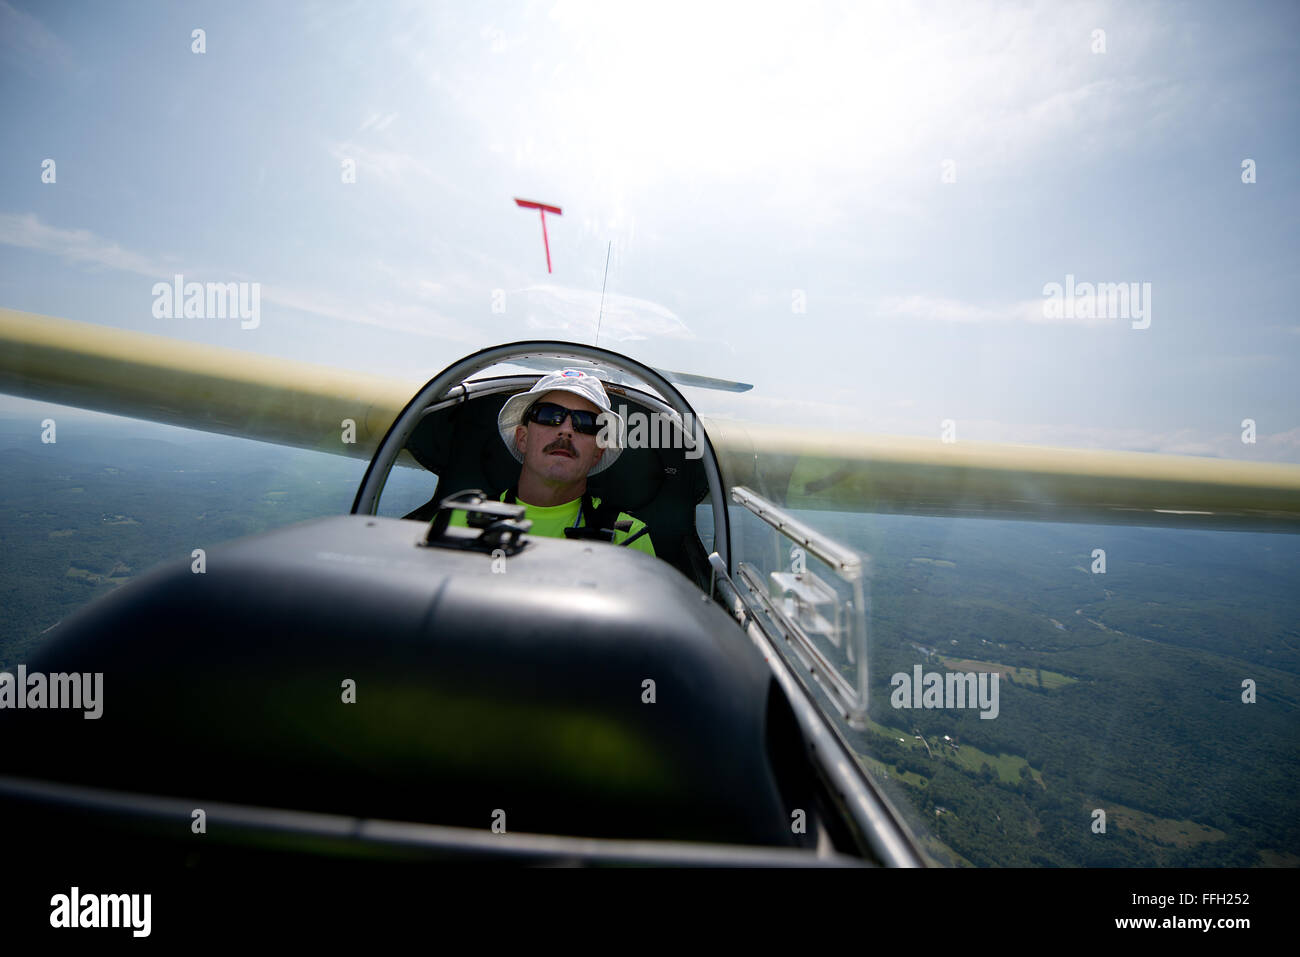 Instructor pilot, Lt. Col. Charlie Freeman, pilots an L-23 Super Blanik glider during the Civil Air Patrol's Northeast Region Glider Academy in Springfield, Vt. On average, each cadet flies 20 sorties at the academy, with Civil Air Patrol instructors observing and teaching. Stock Photo